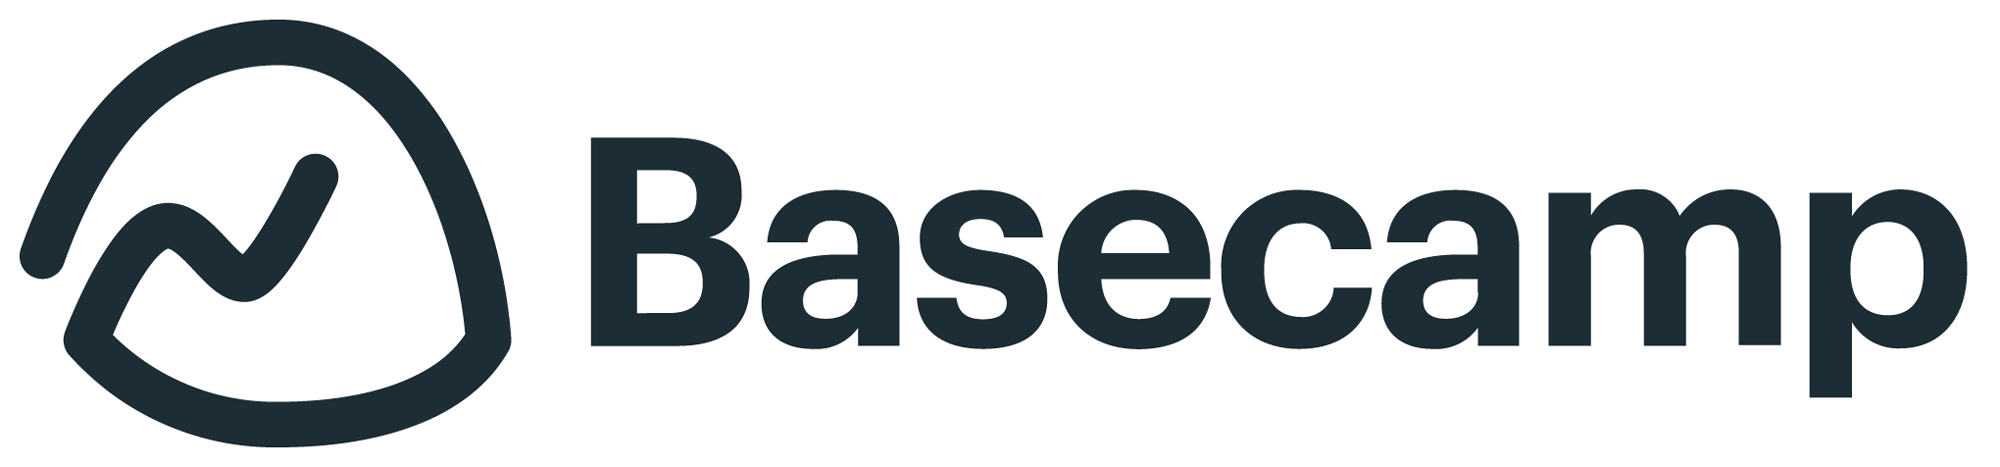 New Logo for Basecamp done In-house